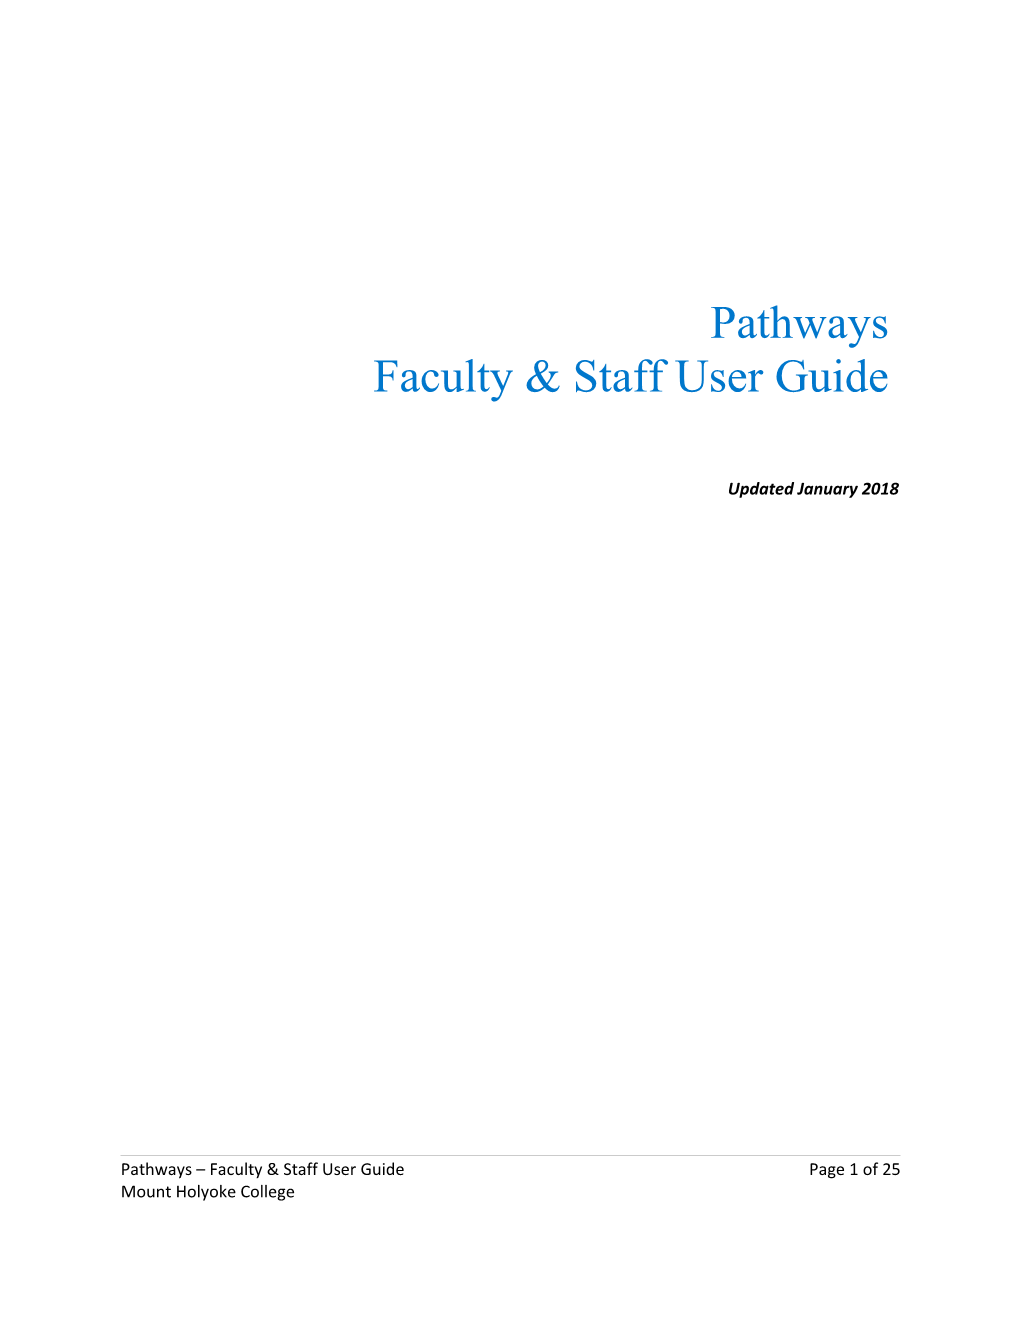 Faculty & Staff User Guide for Pathways